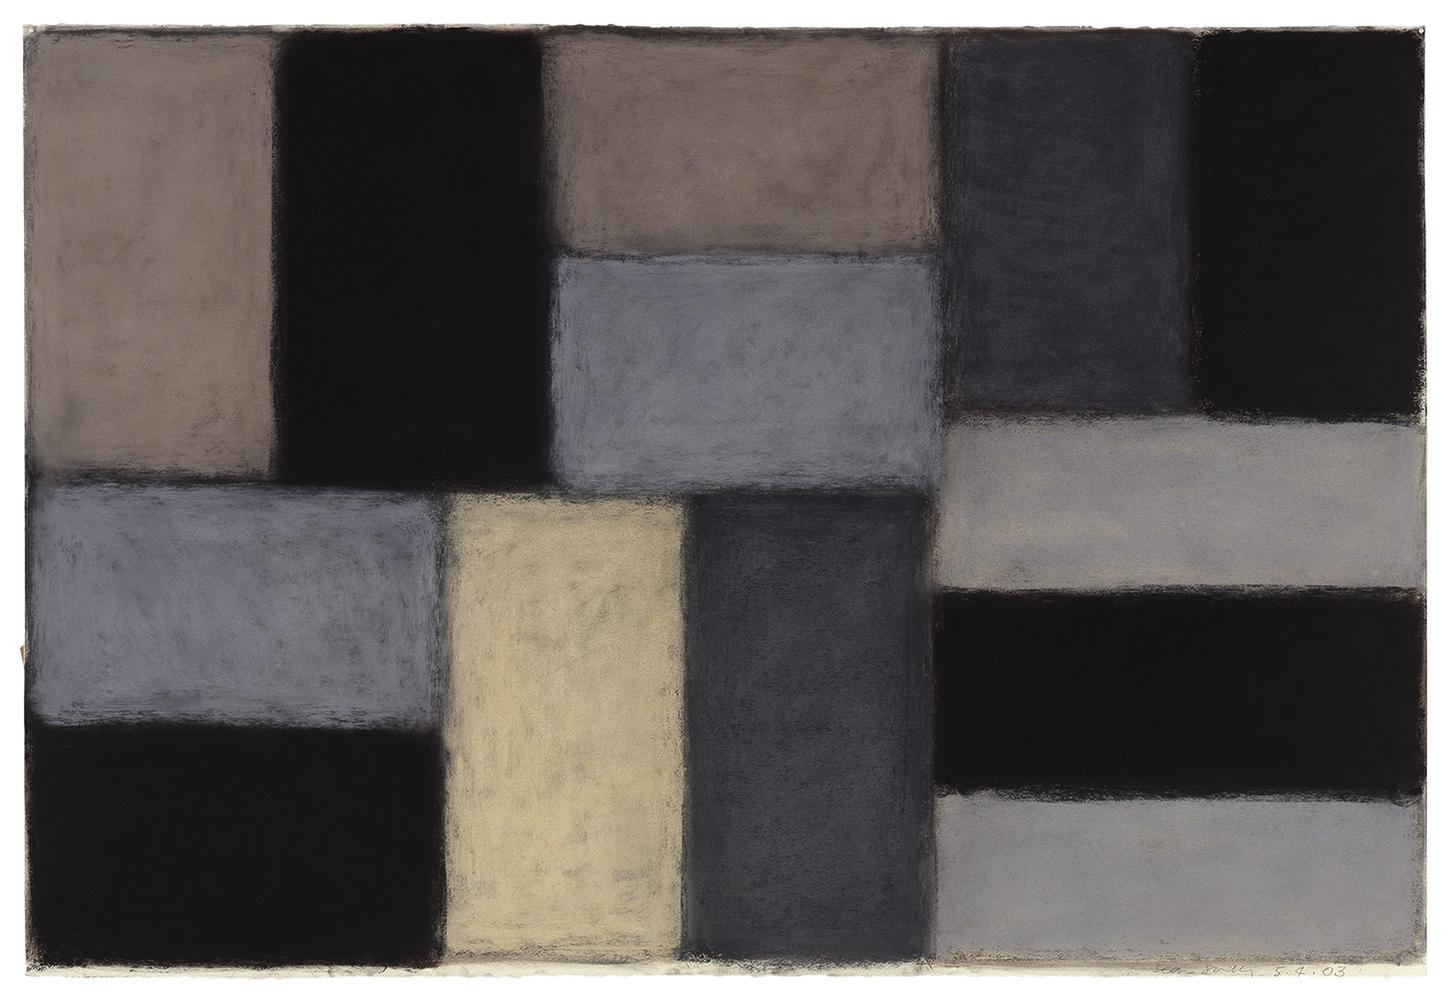 Sean Scully
5.4.03
2003
pastel on paper
40 x 60 inches (101.6 x 152.4 cm)